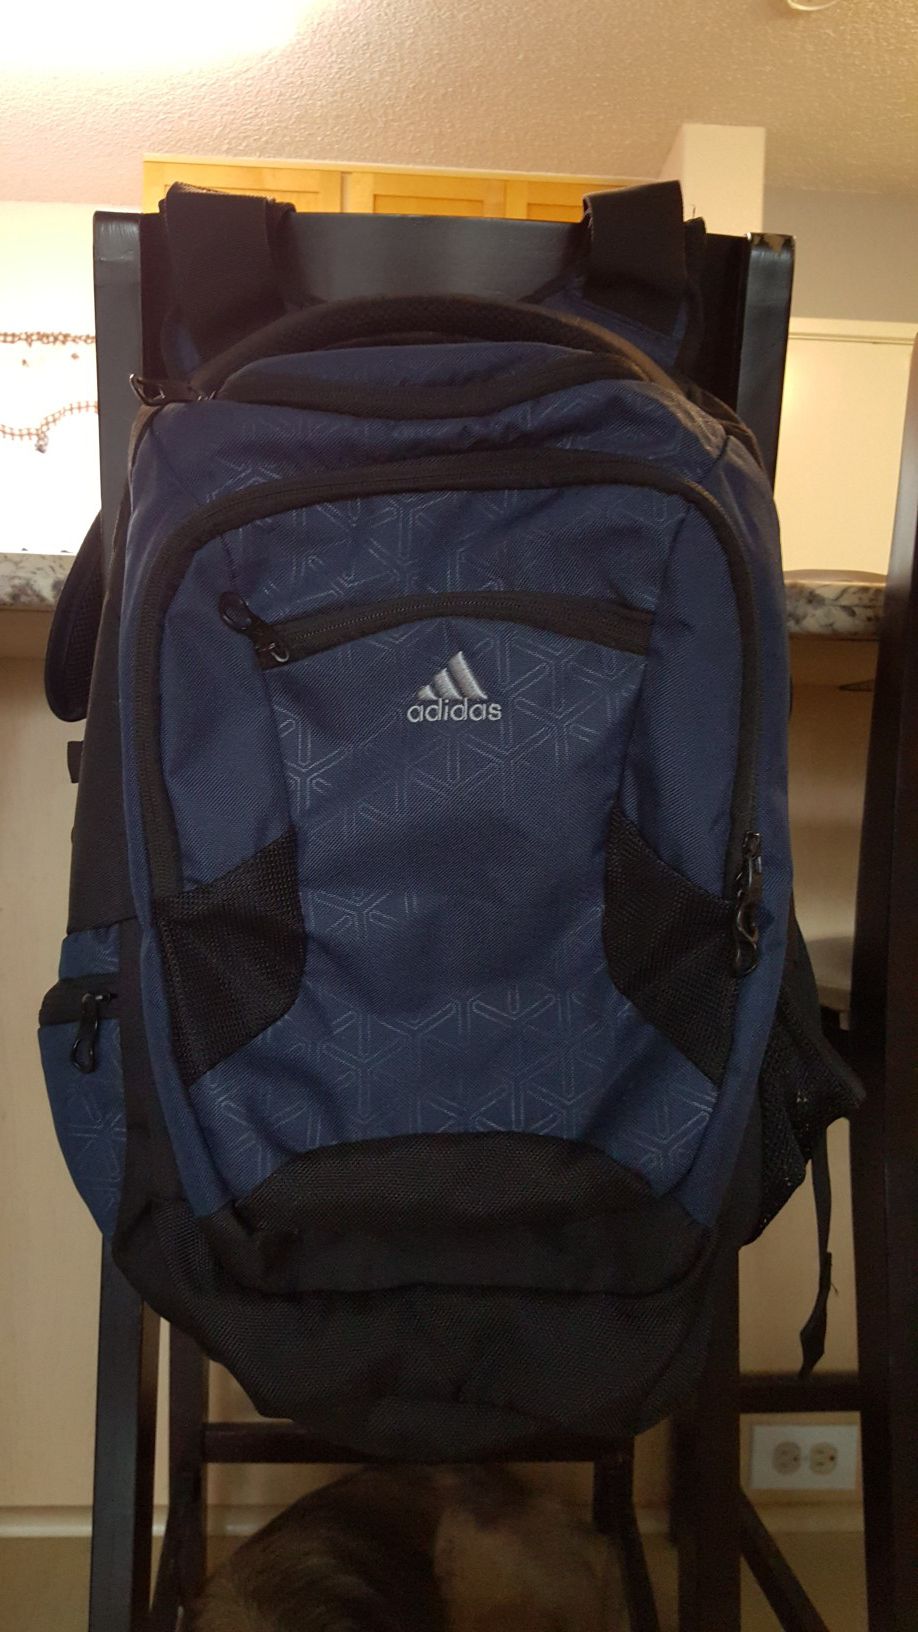 Adidas Navy Climacool LoadSpring for Sale in Aiea, HI - OfferUp